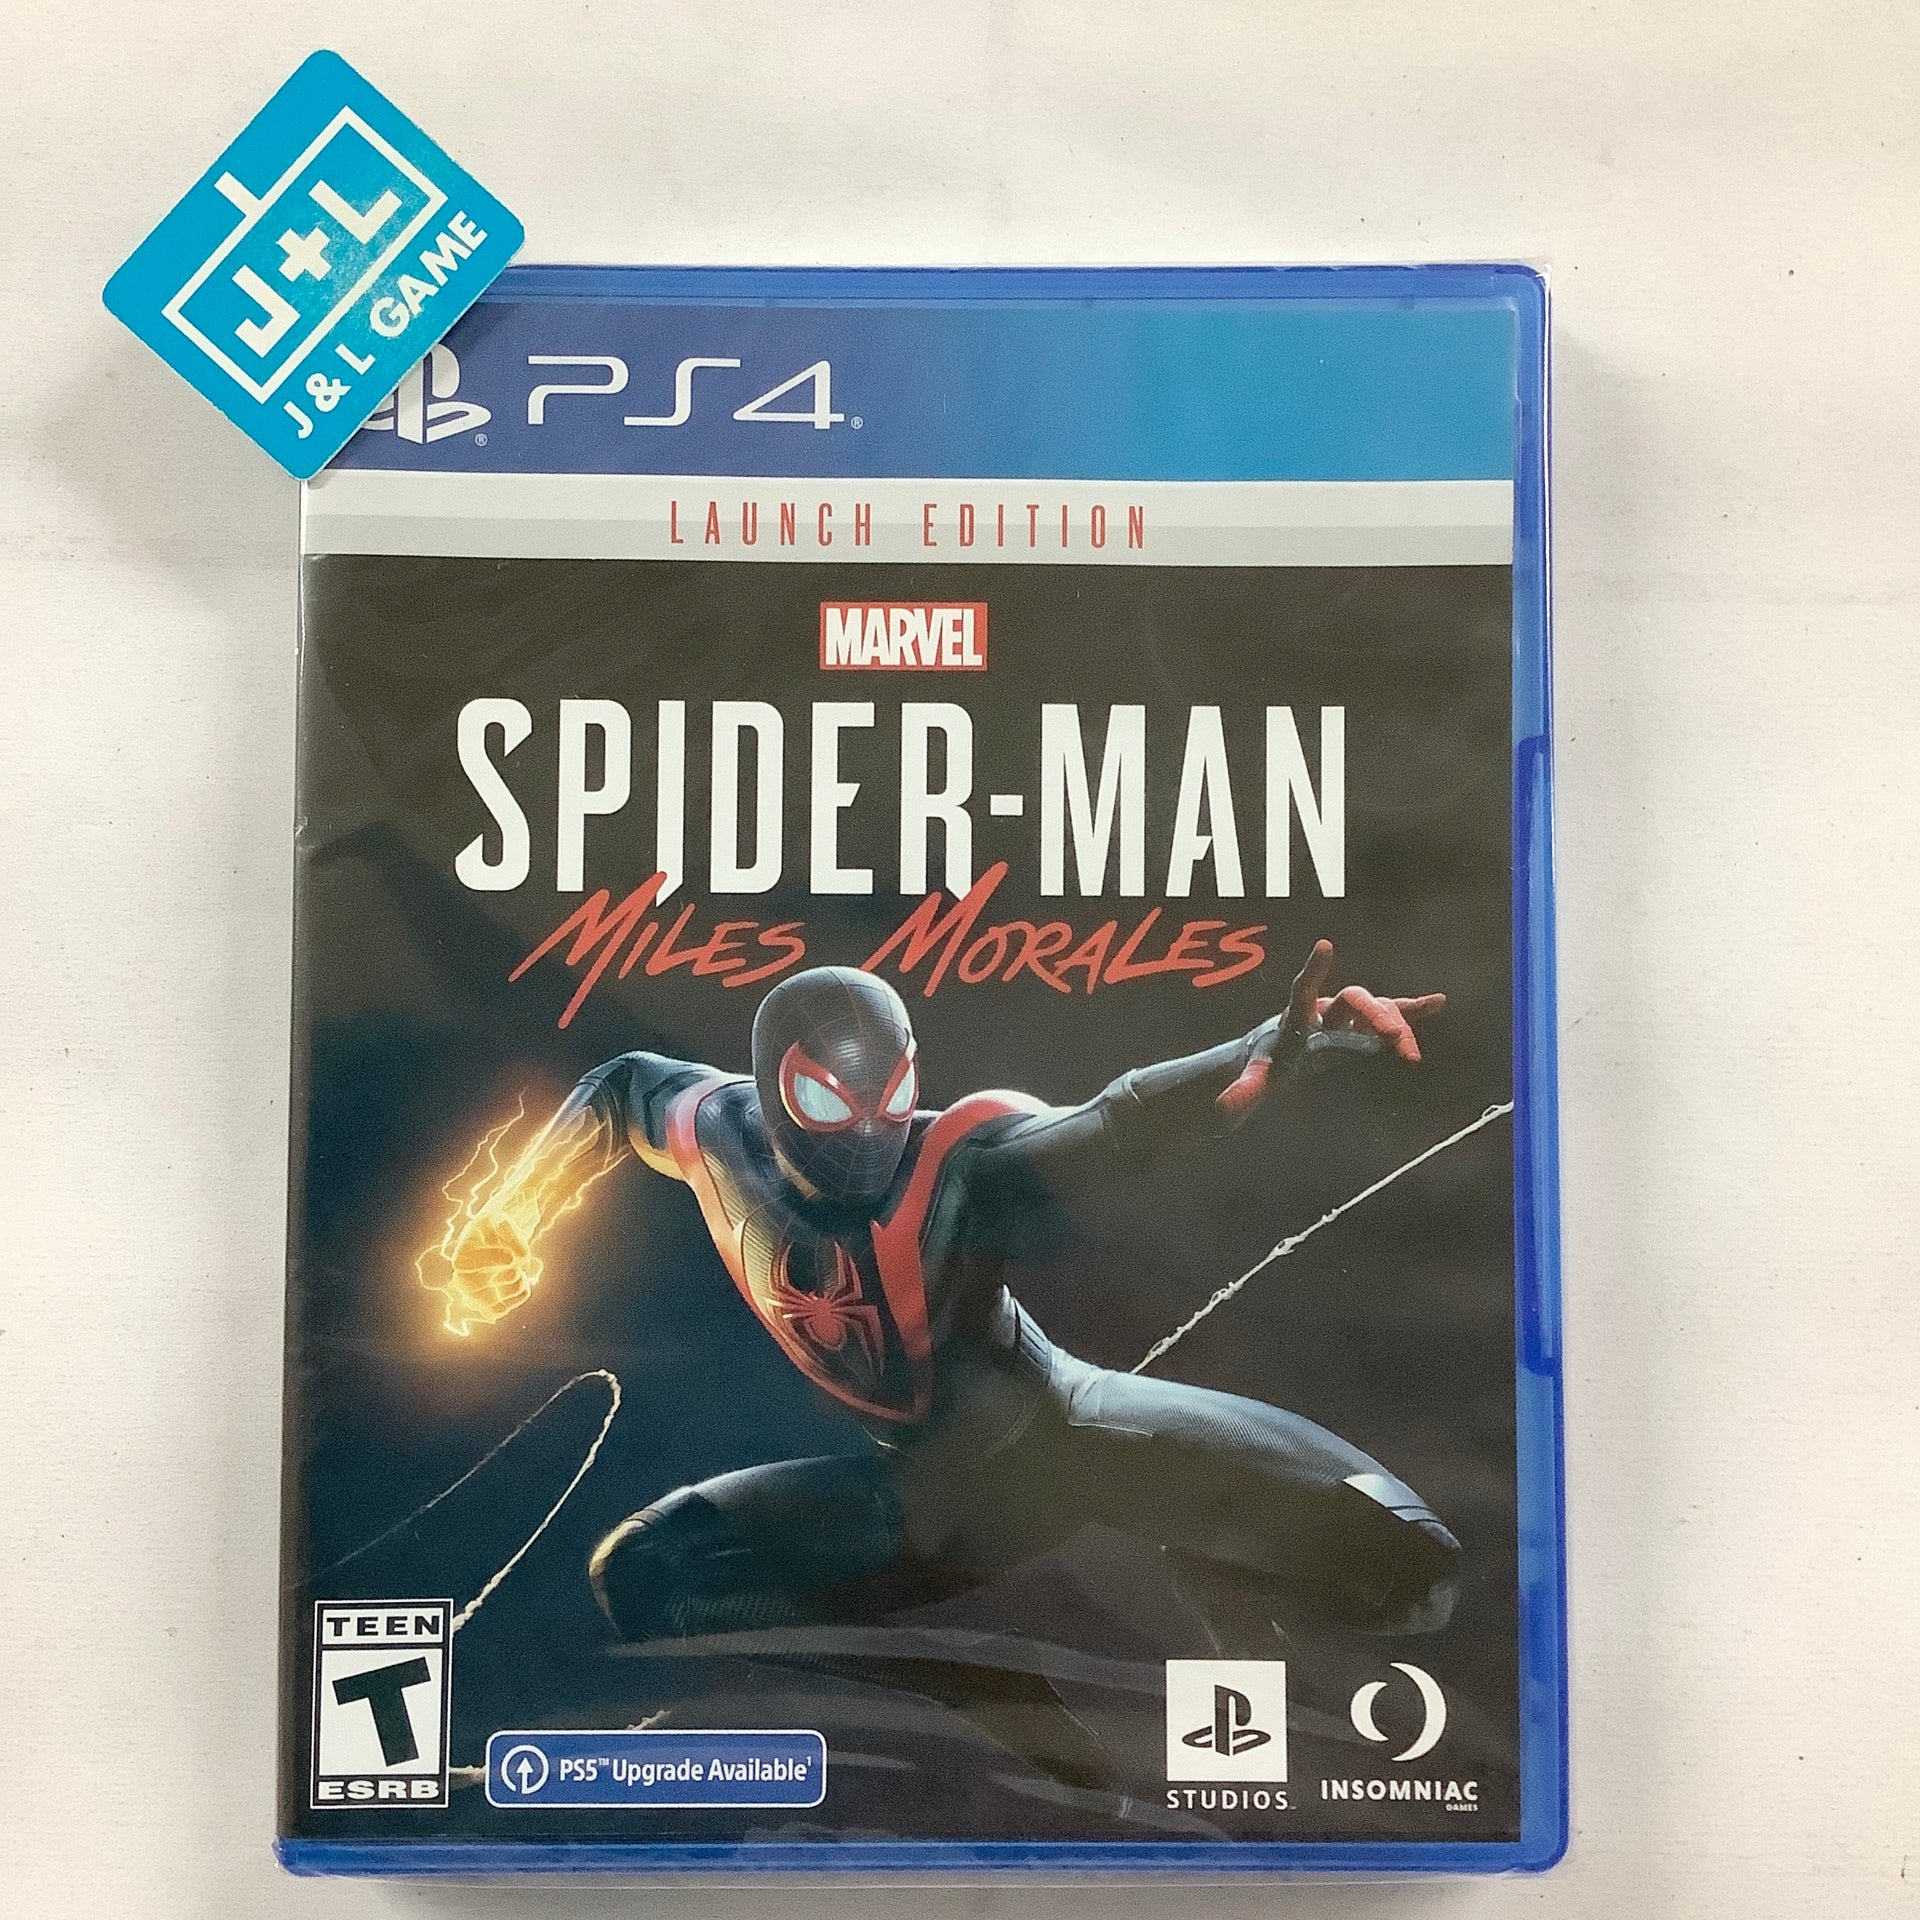 Marvel's Spider-Man: Game of The Year Edition - PlayStation 4